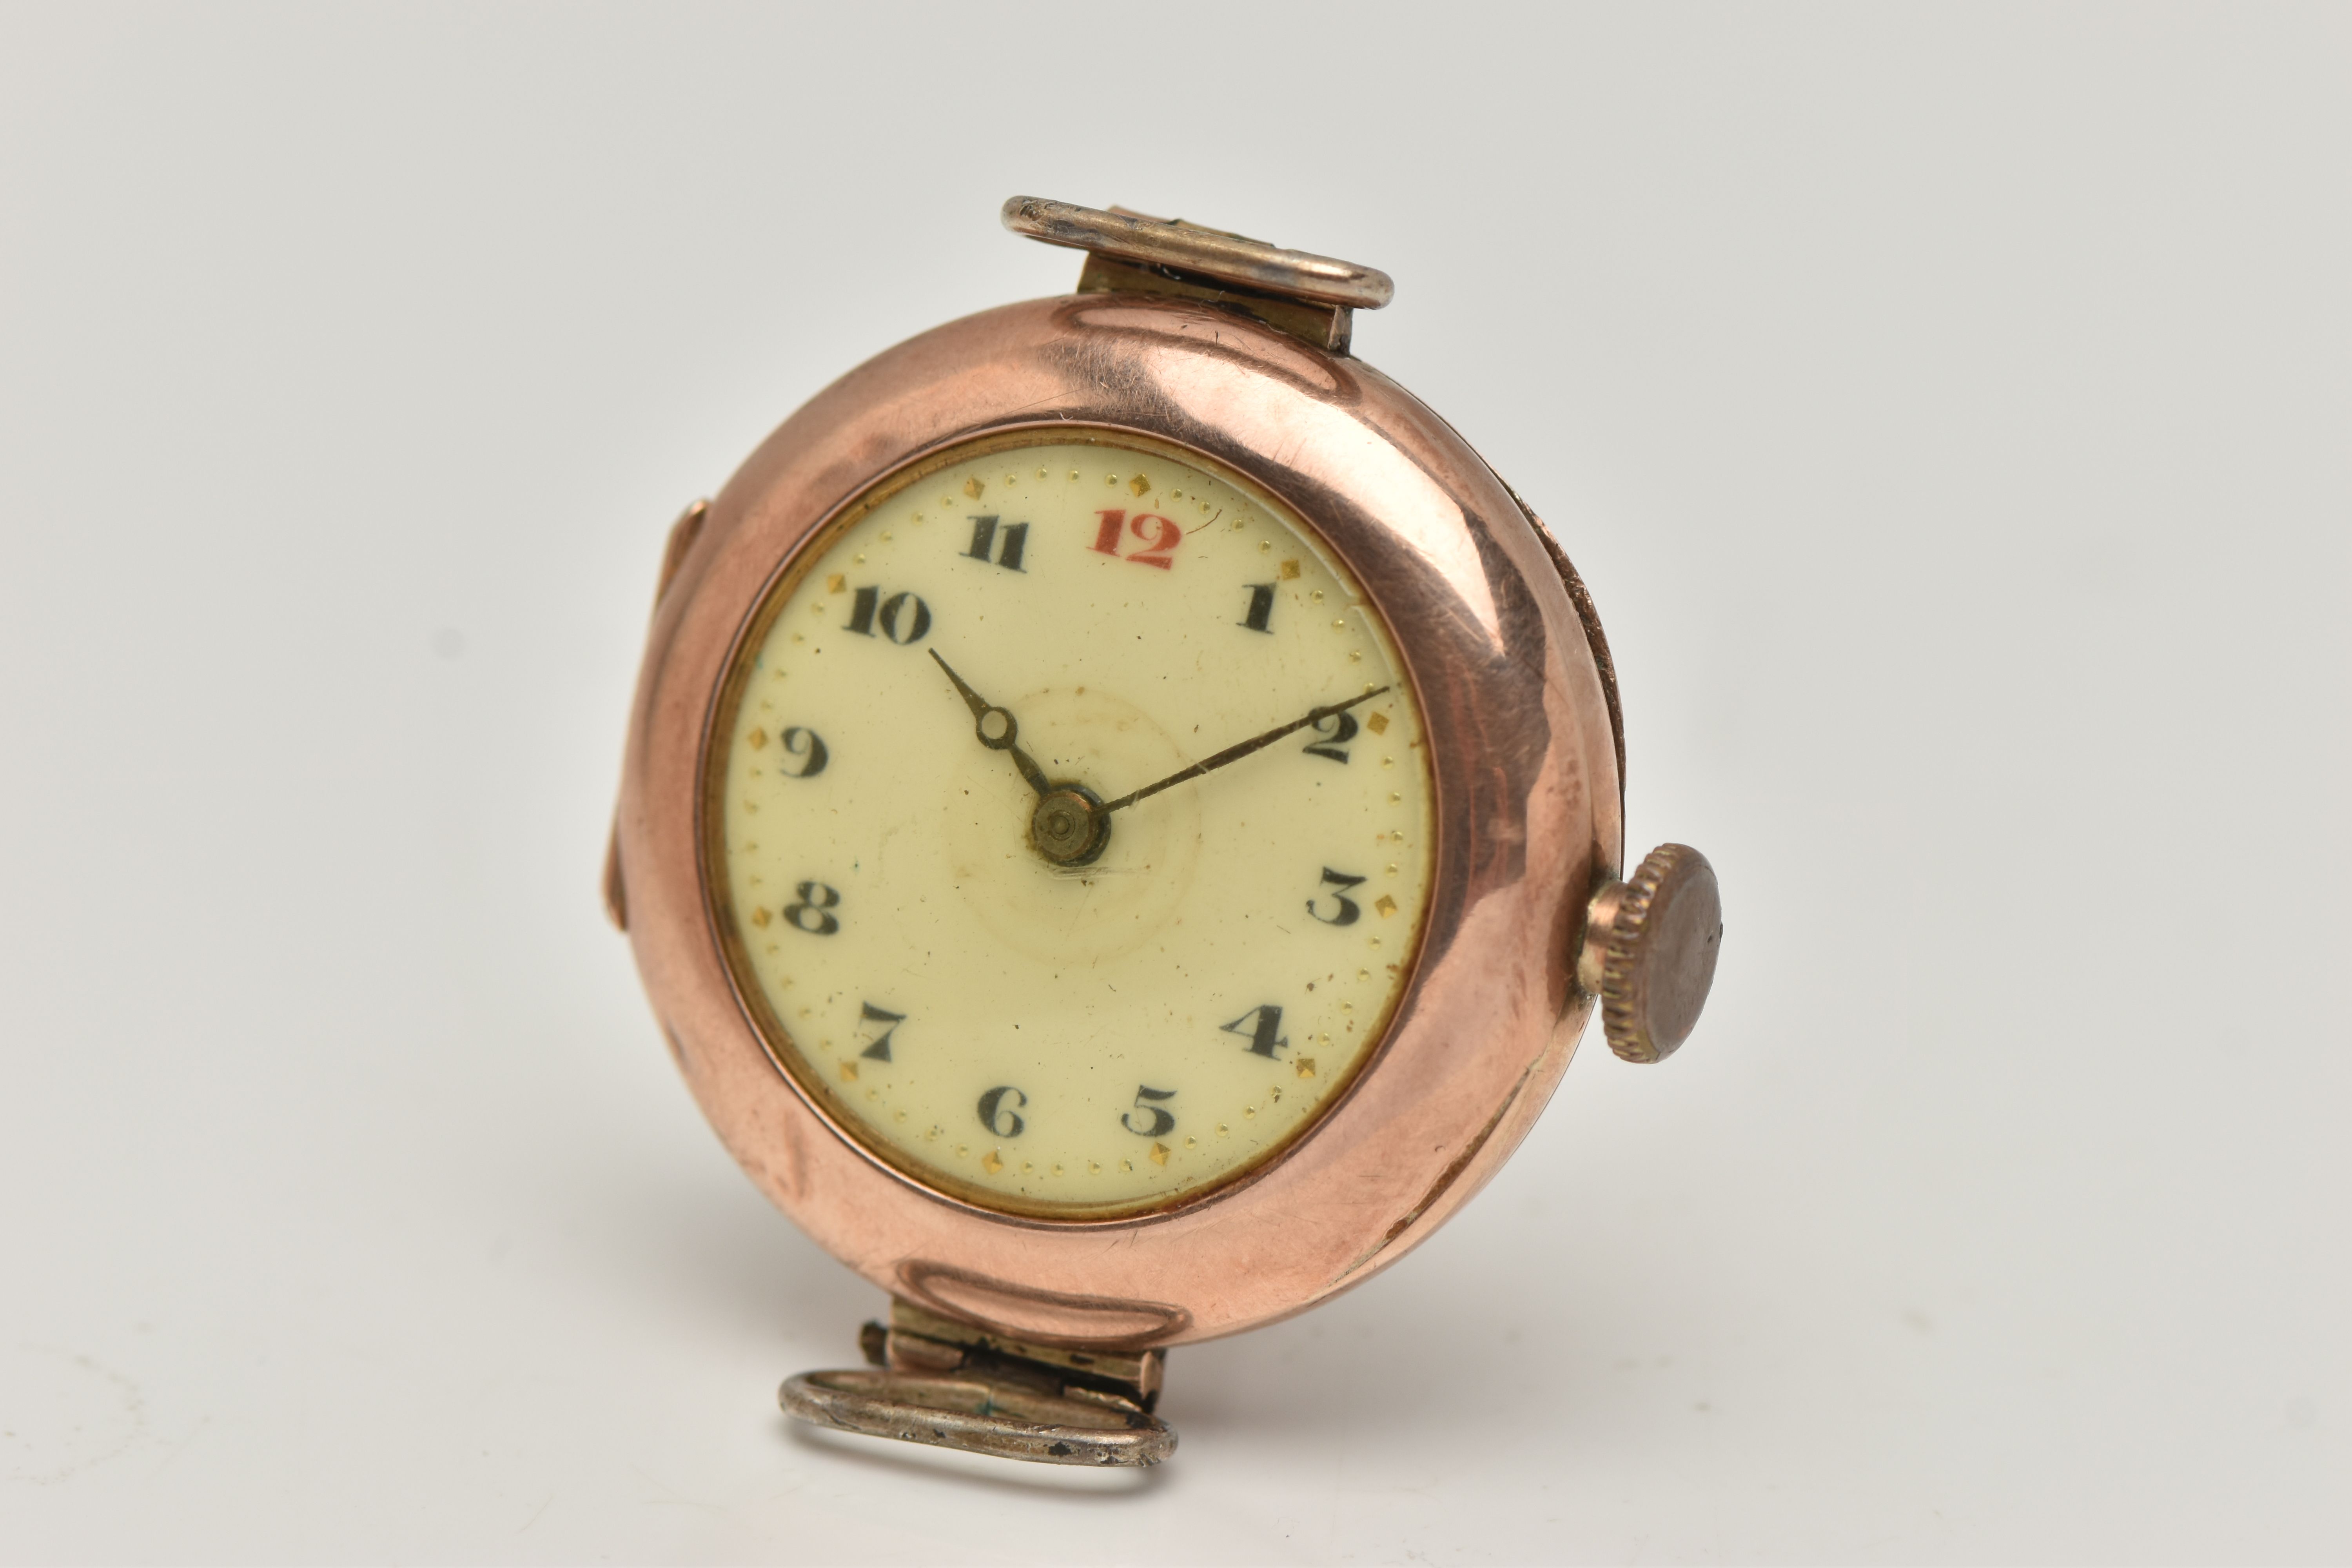 A 9CT GOLD 'ROLEX' WATCH HEAD, an early 20th century, manual wind watch head, round white dial, - Image 3 of 6